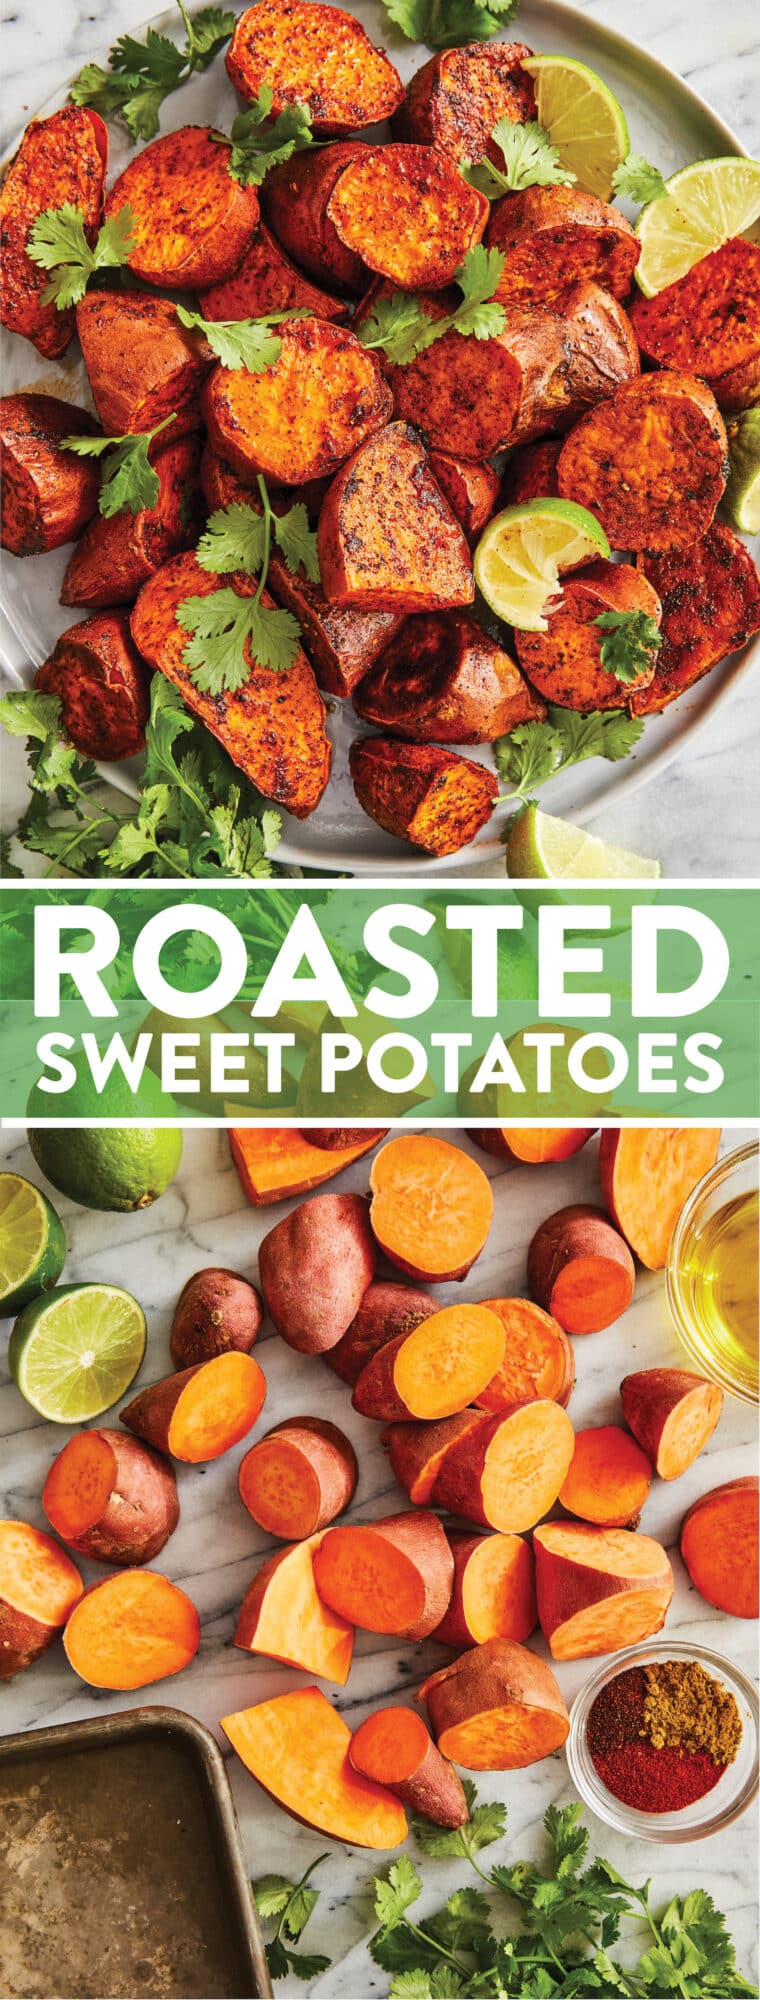 Roasted Sweet Potatoes - Amazingly crisp-tender sweet potatoes roasted to perfection. Such a quick, easy, vegetarian side dish for any meal!